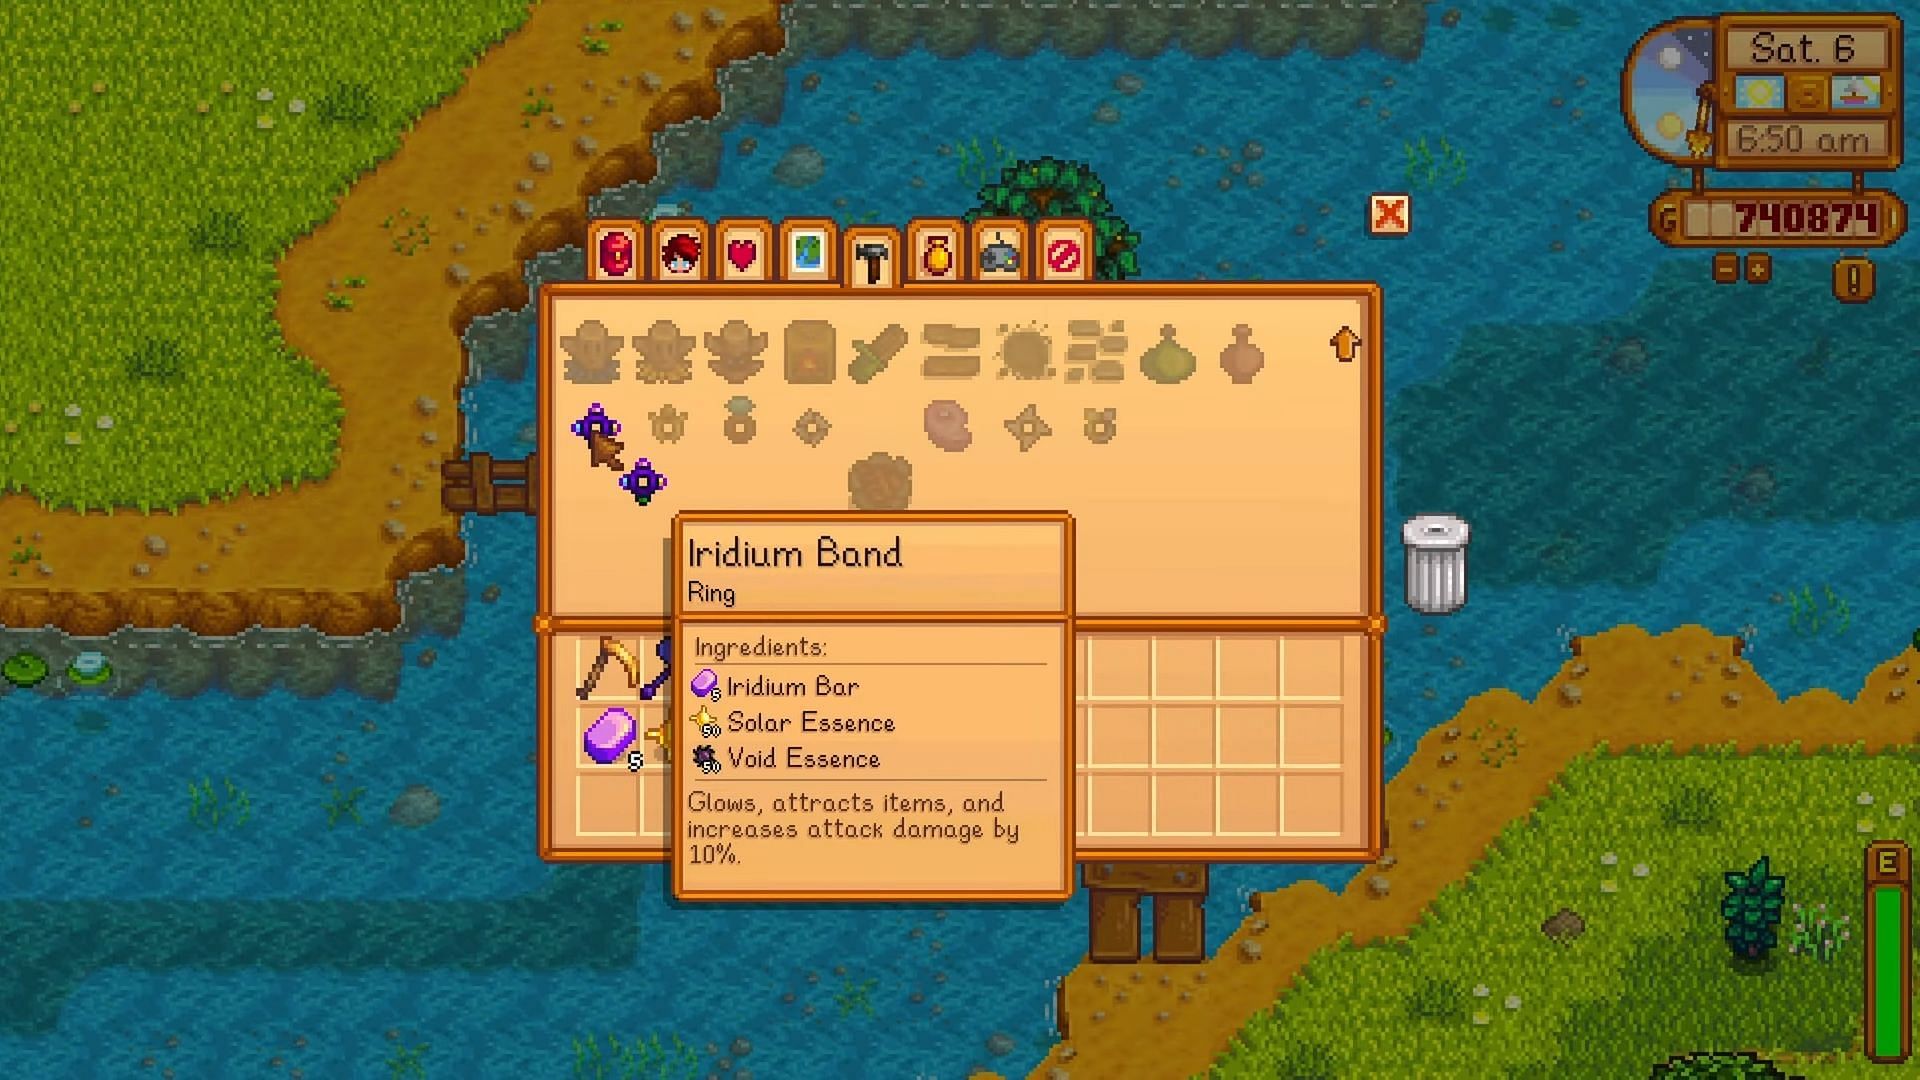 The Iridium Bands are great for collecting resources (Image via ConcernedApe II MGaud/ Youtube)